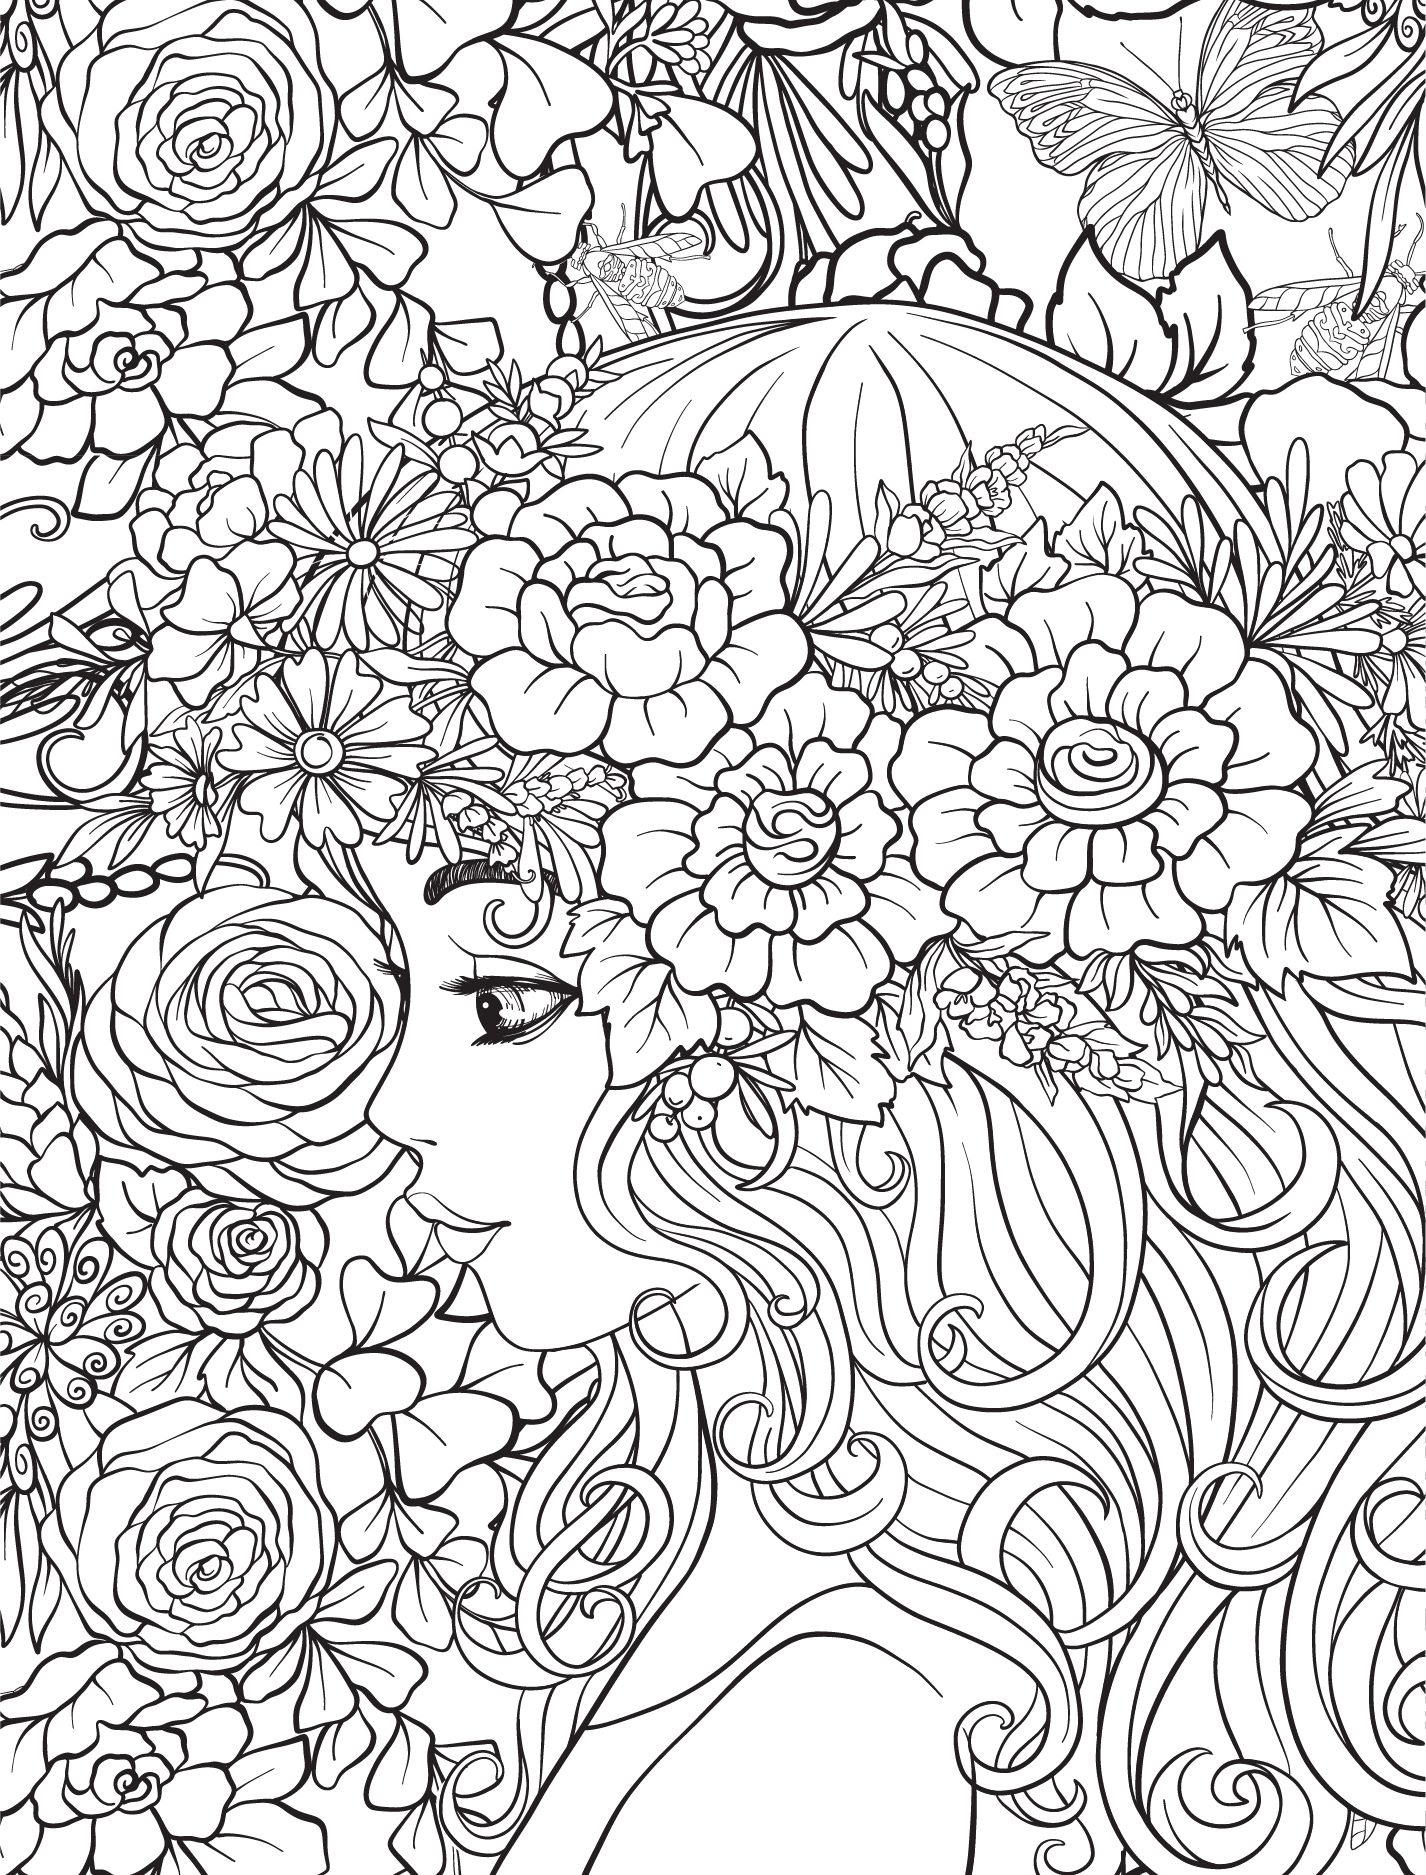 Coloring Pages Of Flowers For Girls 9 And Older Medium - Coloring Pages